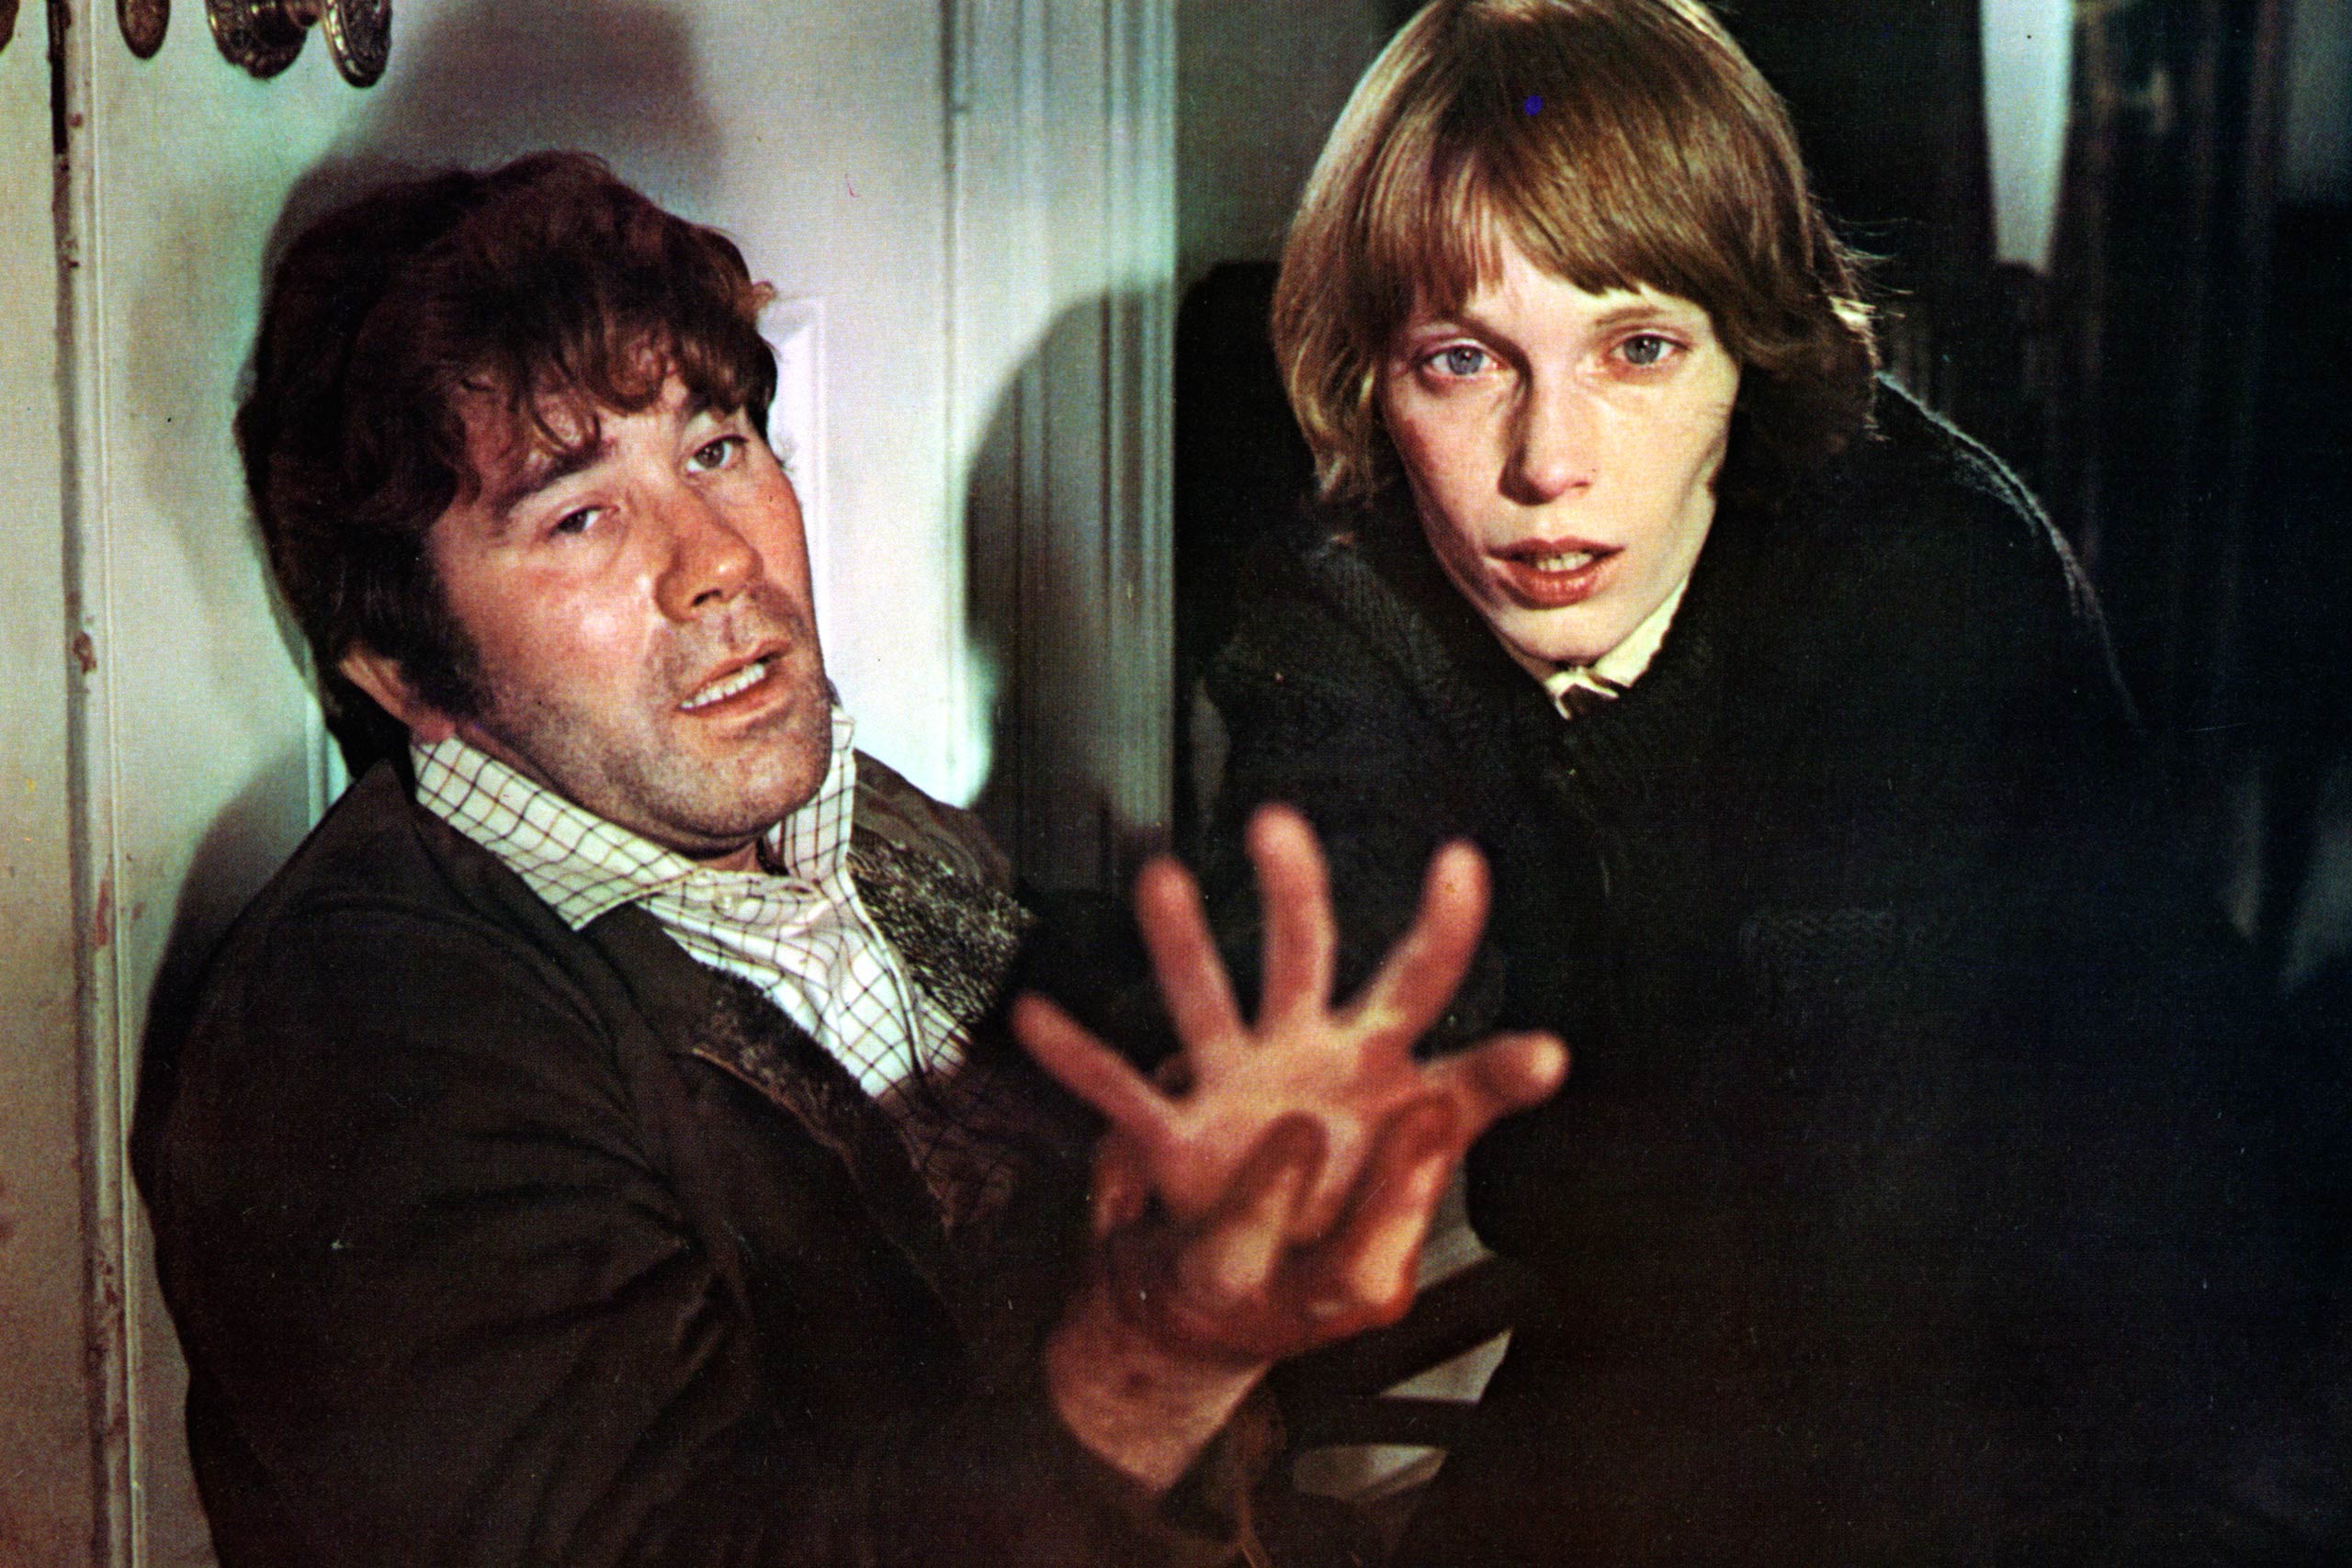 Brian Rawlinson guides the hand of Mia Farrow in a scene from the film Blind Terror, 1971.